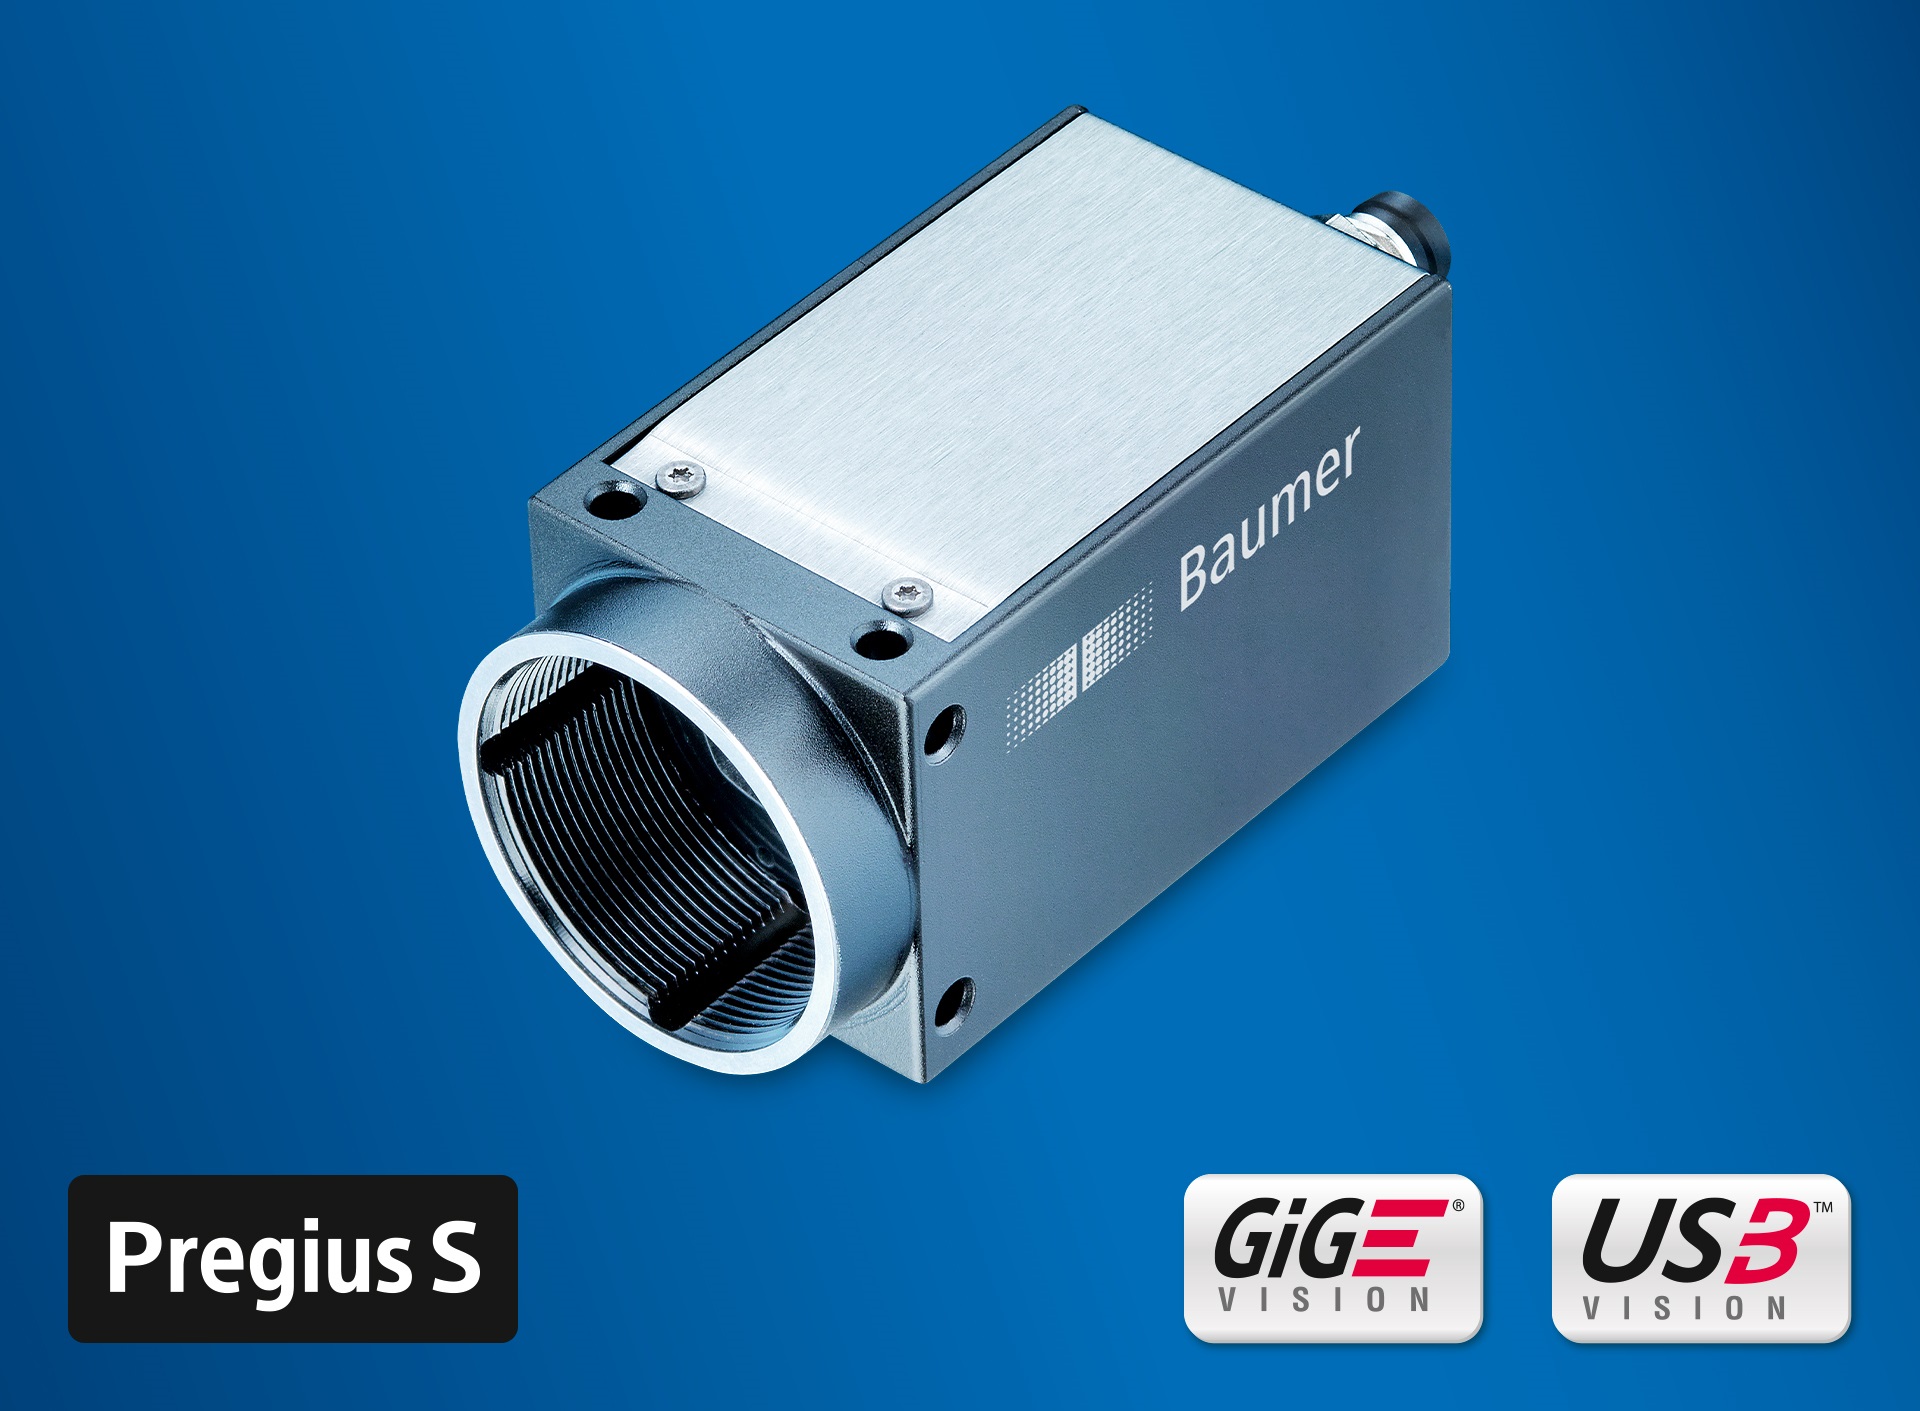 Baumer is expanding its CX camera series with the 4th sensor generation Pregius S from Sony with up to 24 megapixel resolution.